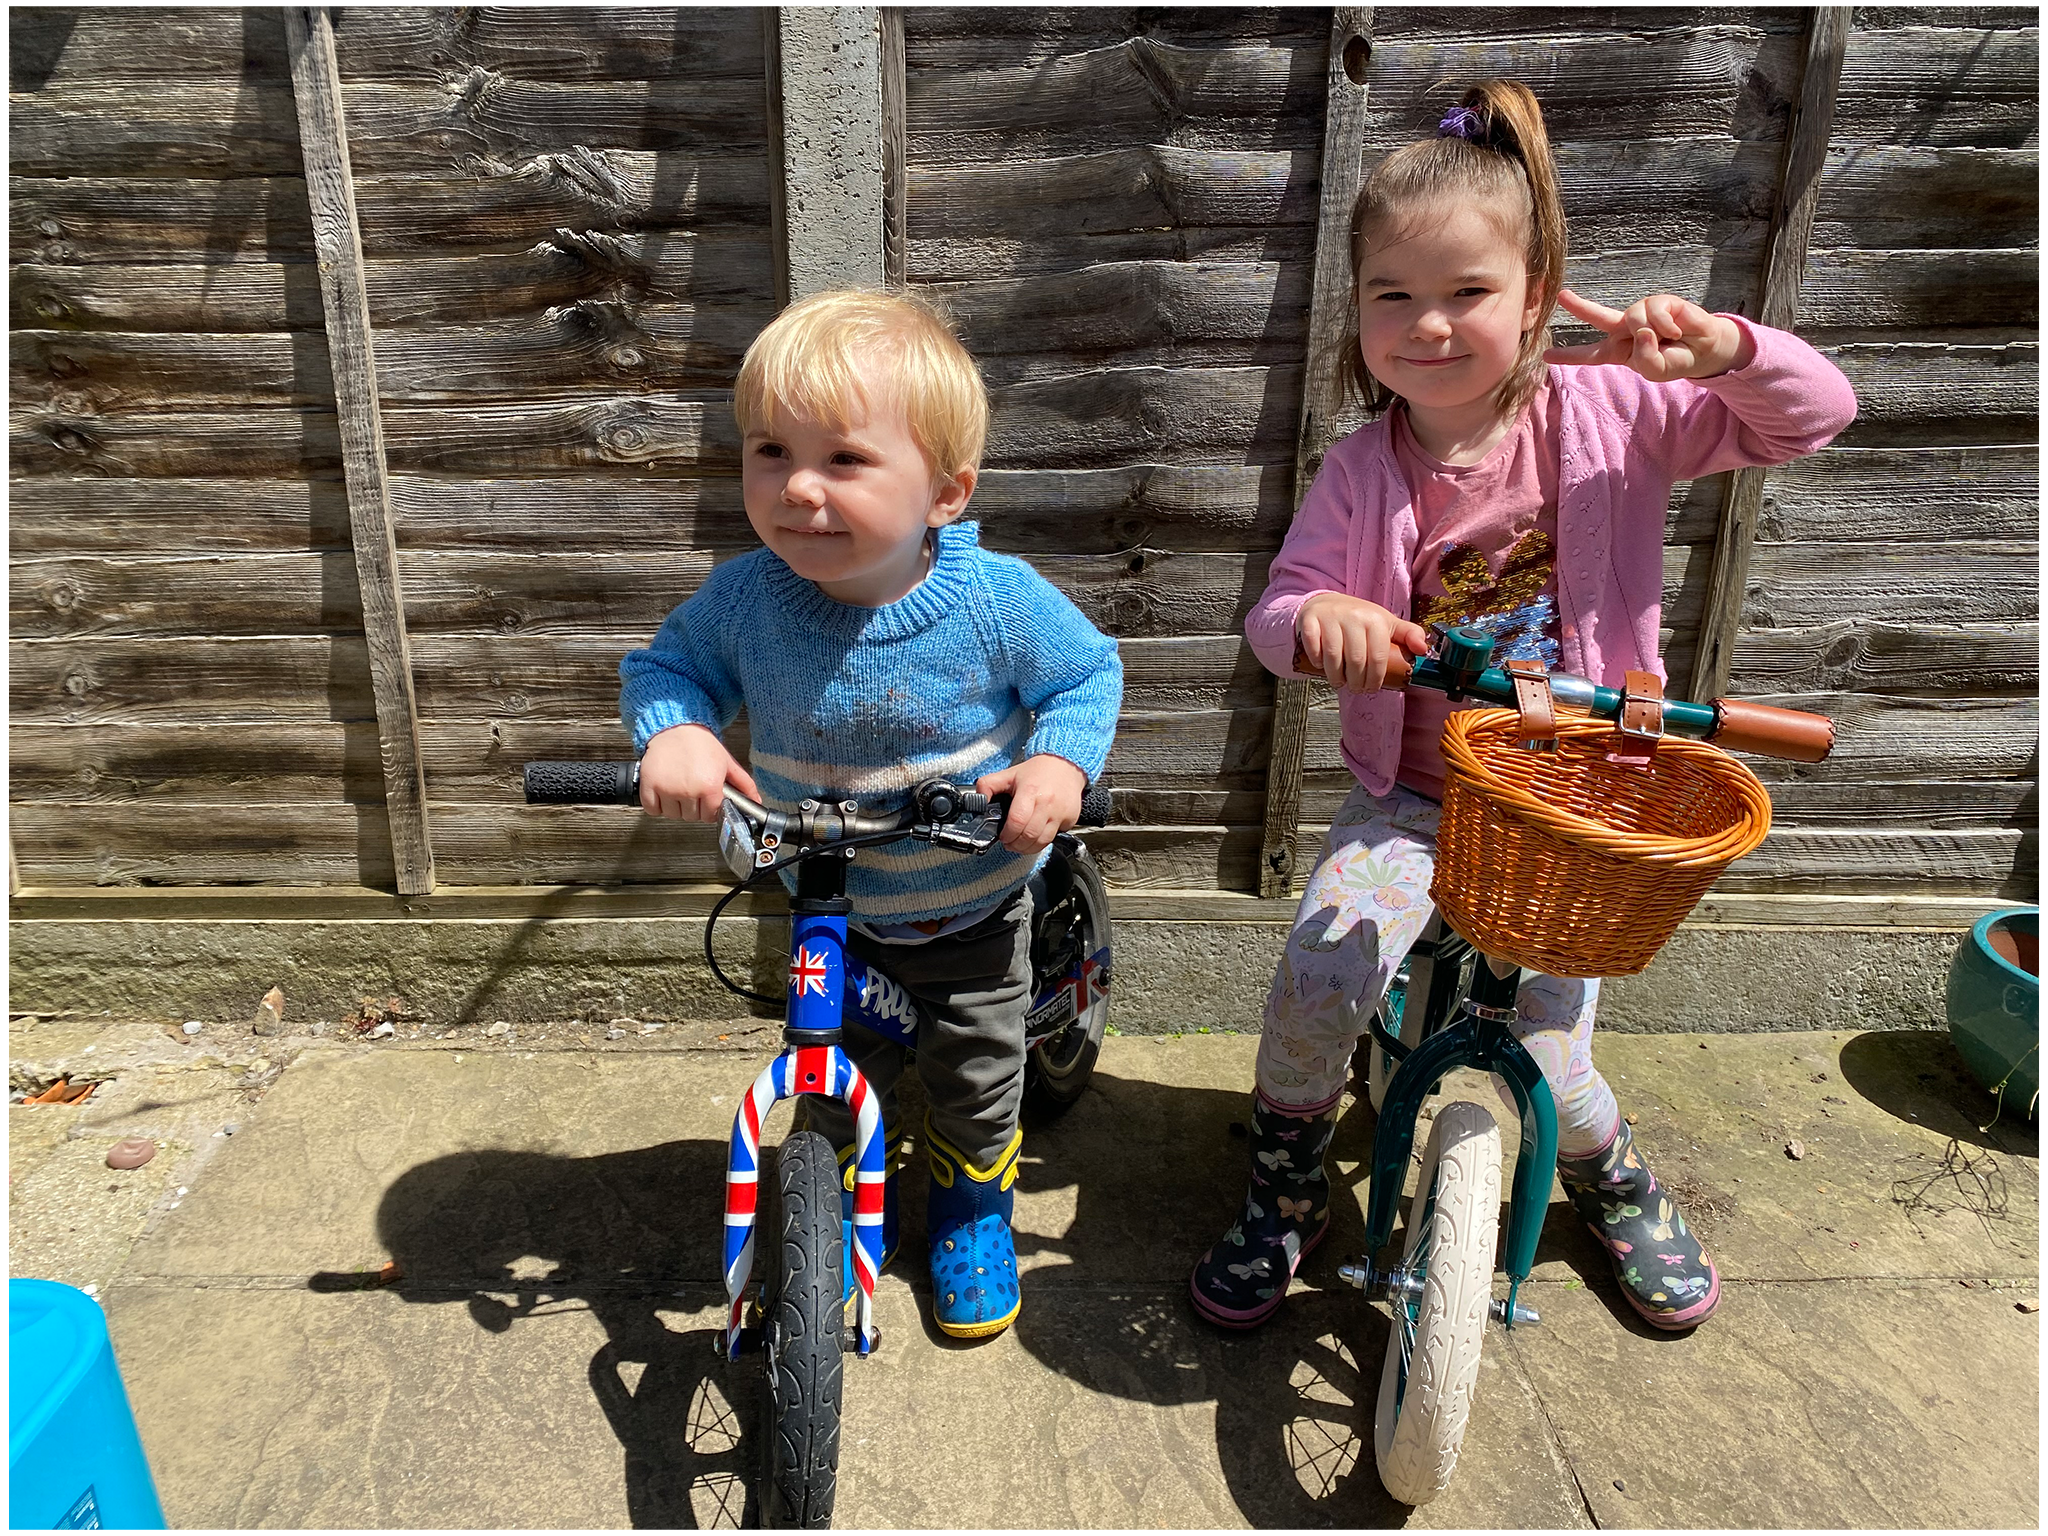 Each bike was taken for a spin by our two- and four-year-old testers